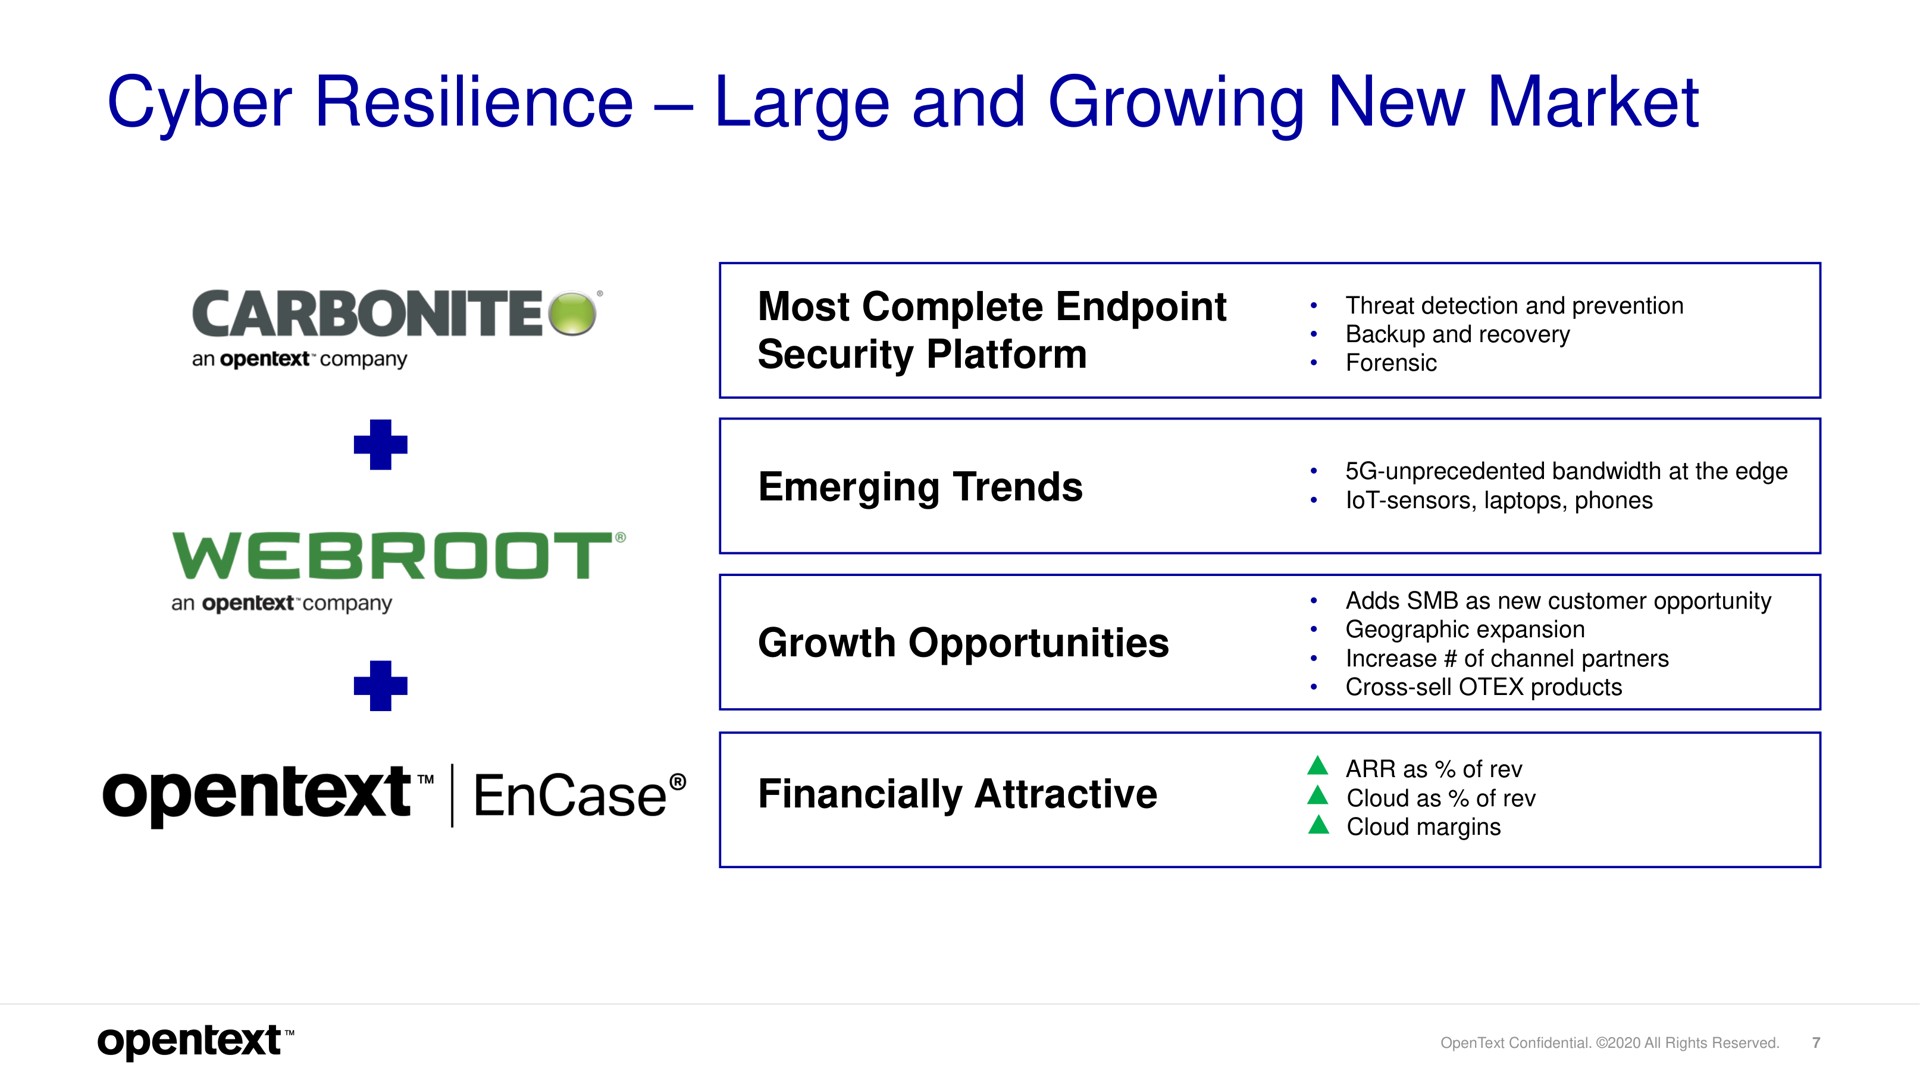 resilience large and growing new market carbonite encase | OpenText